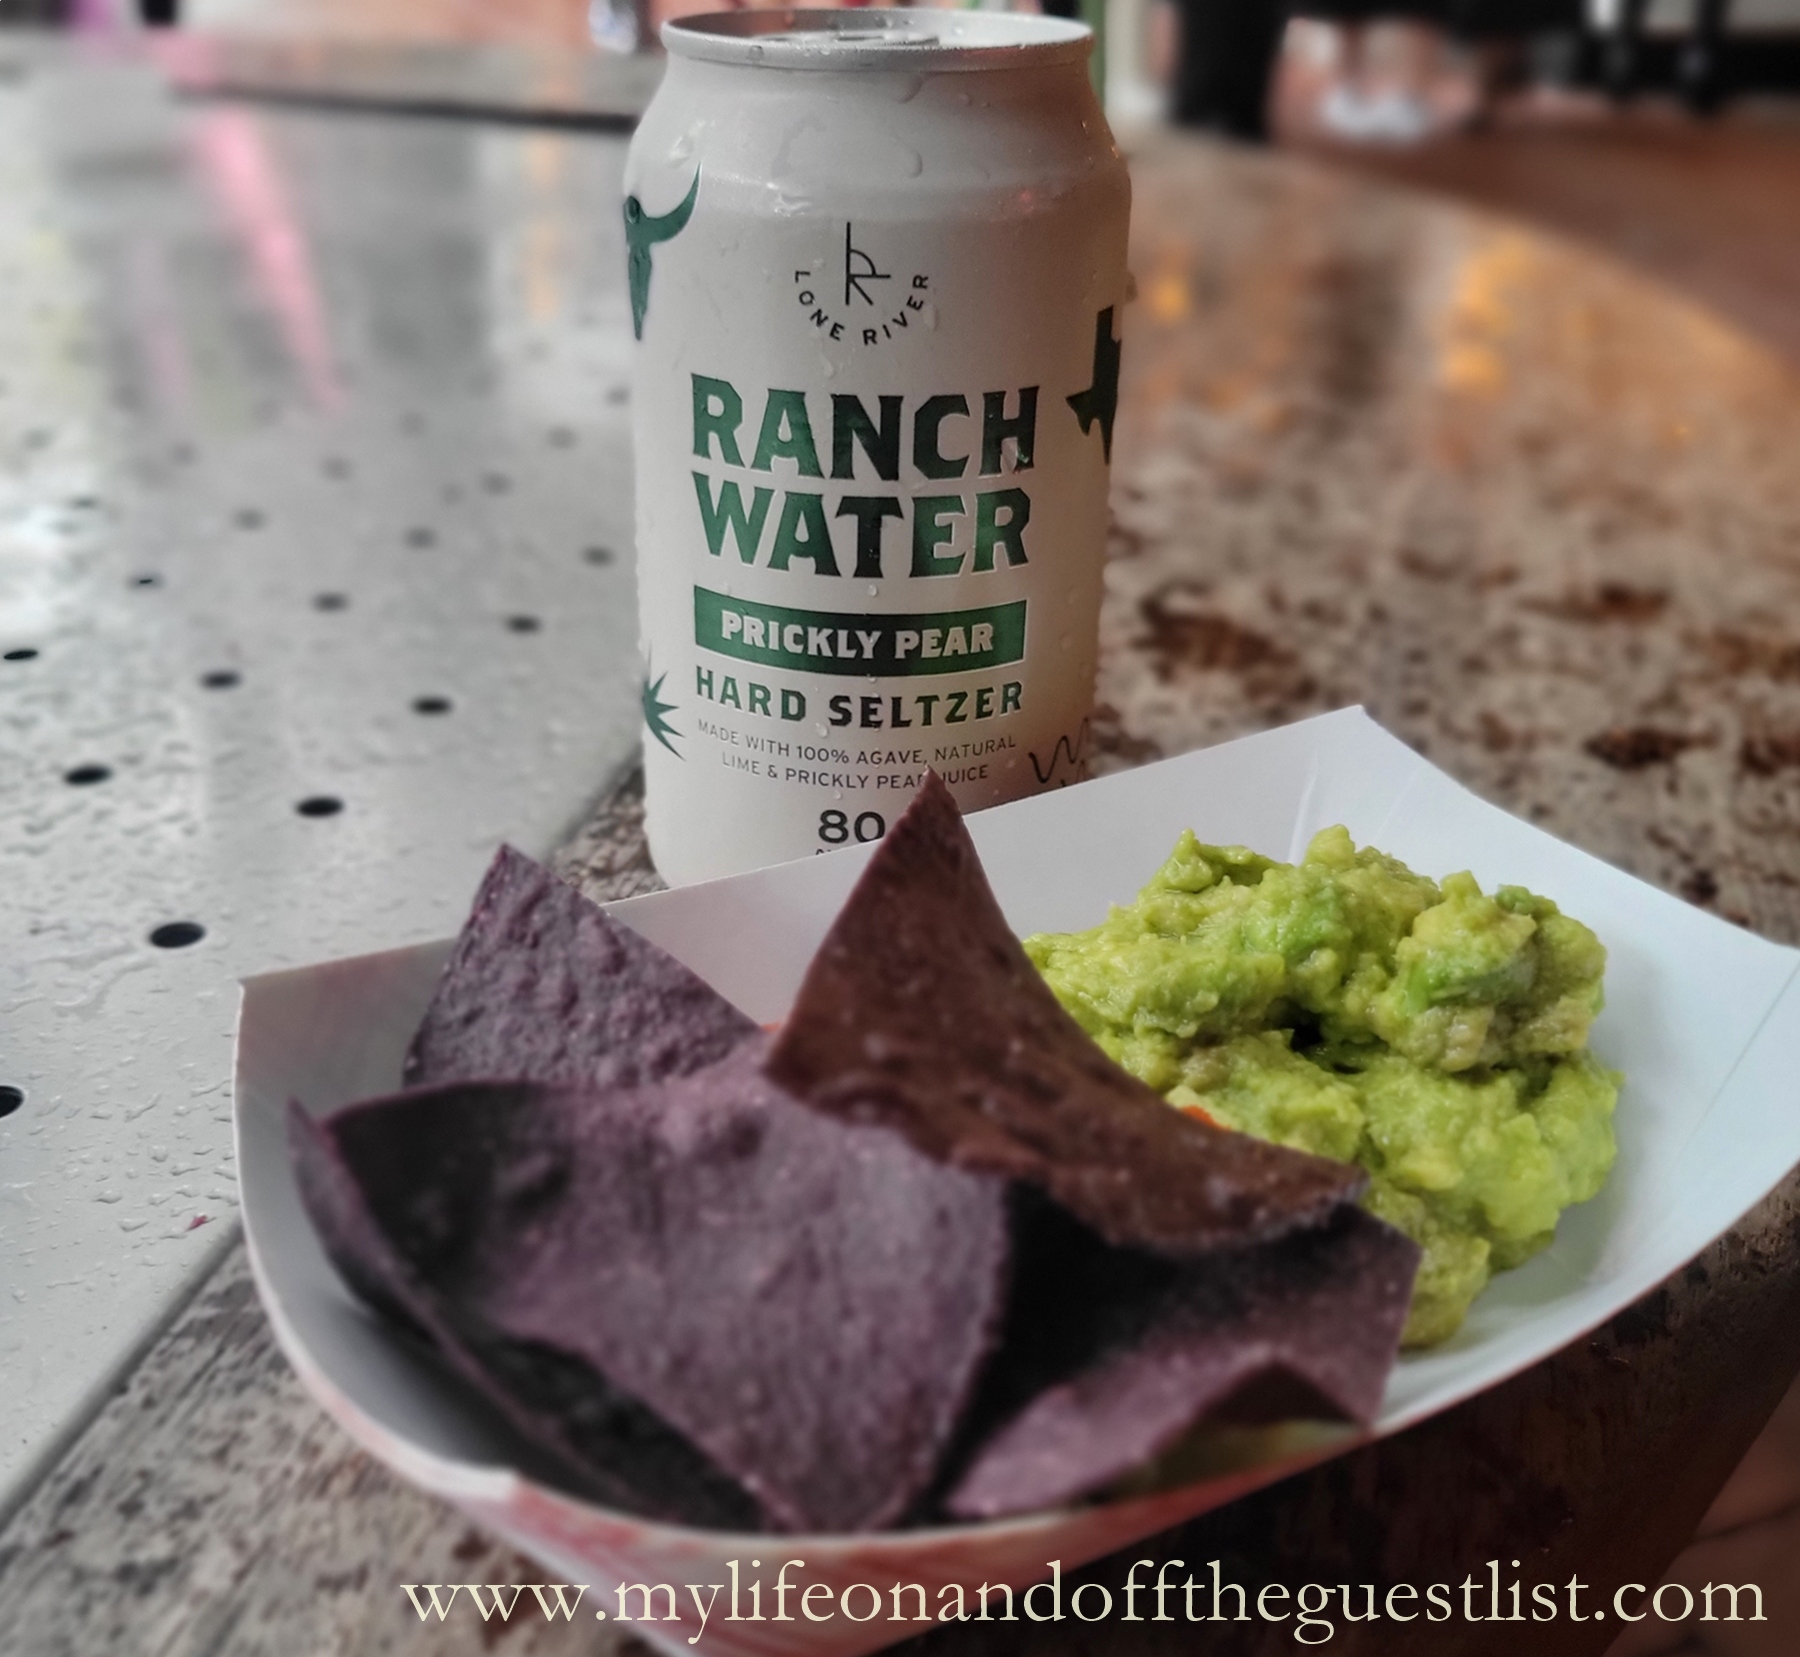 Lone River Ranch Water Launches "Ranch Rita" Margarita-Style Beverage